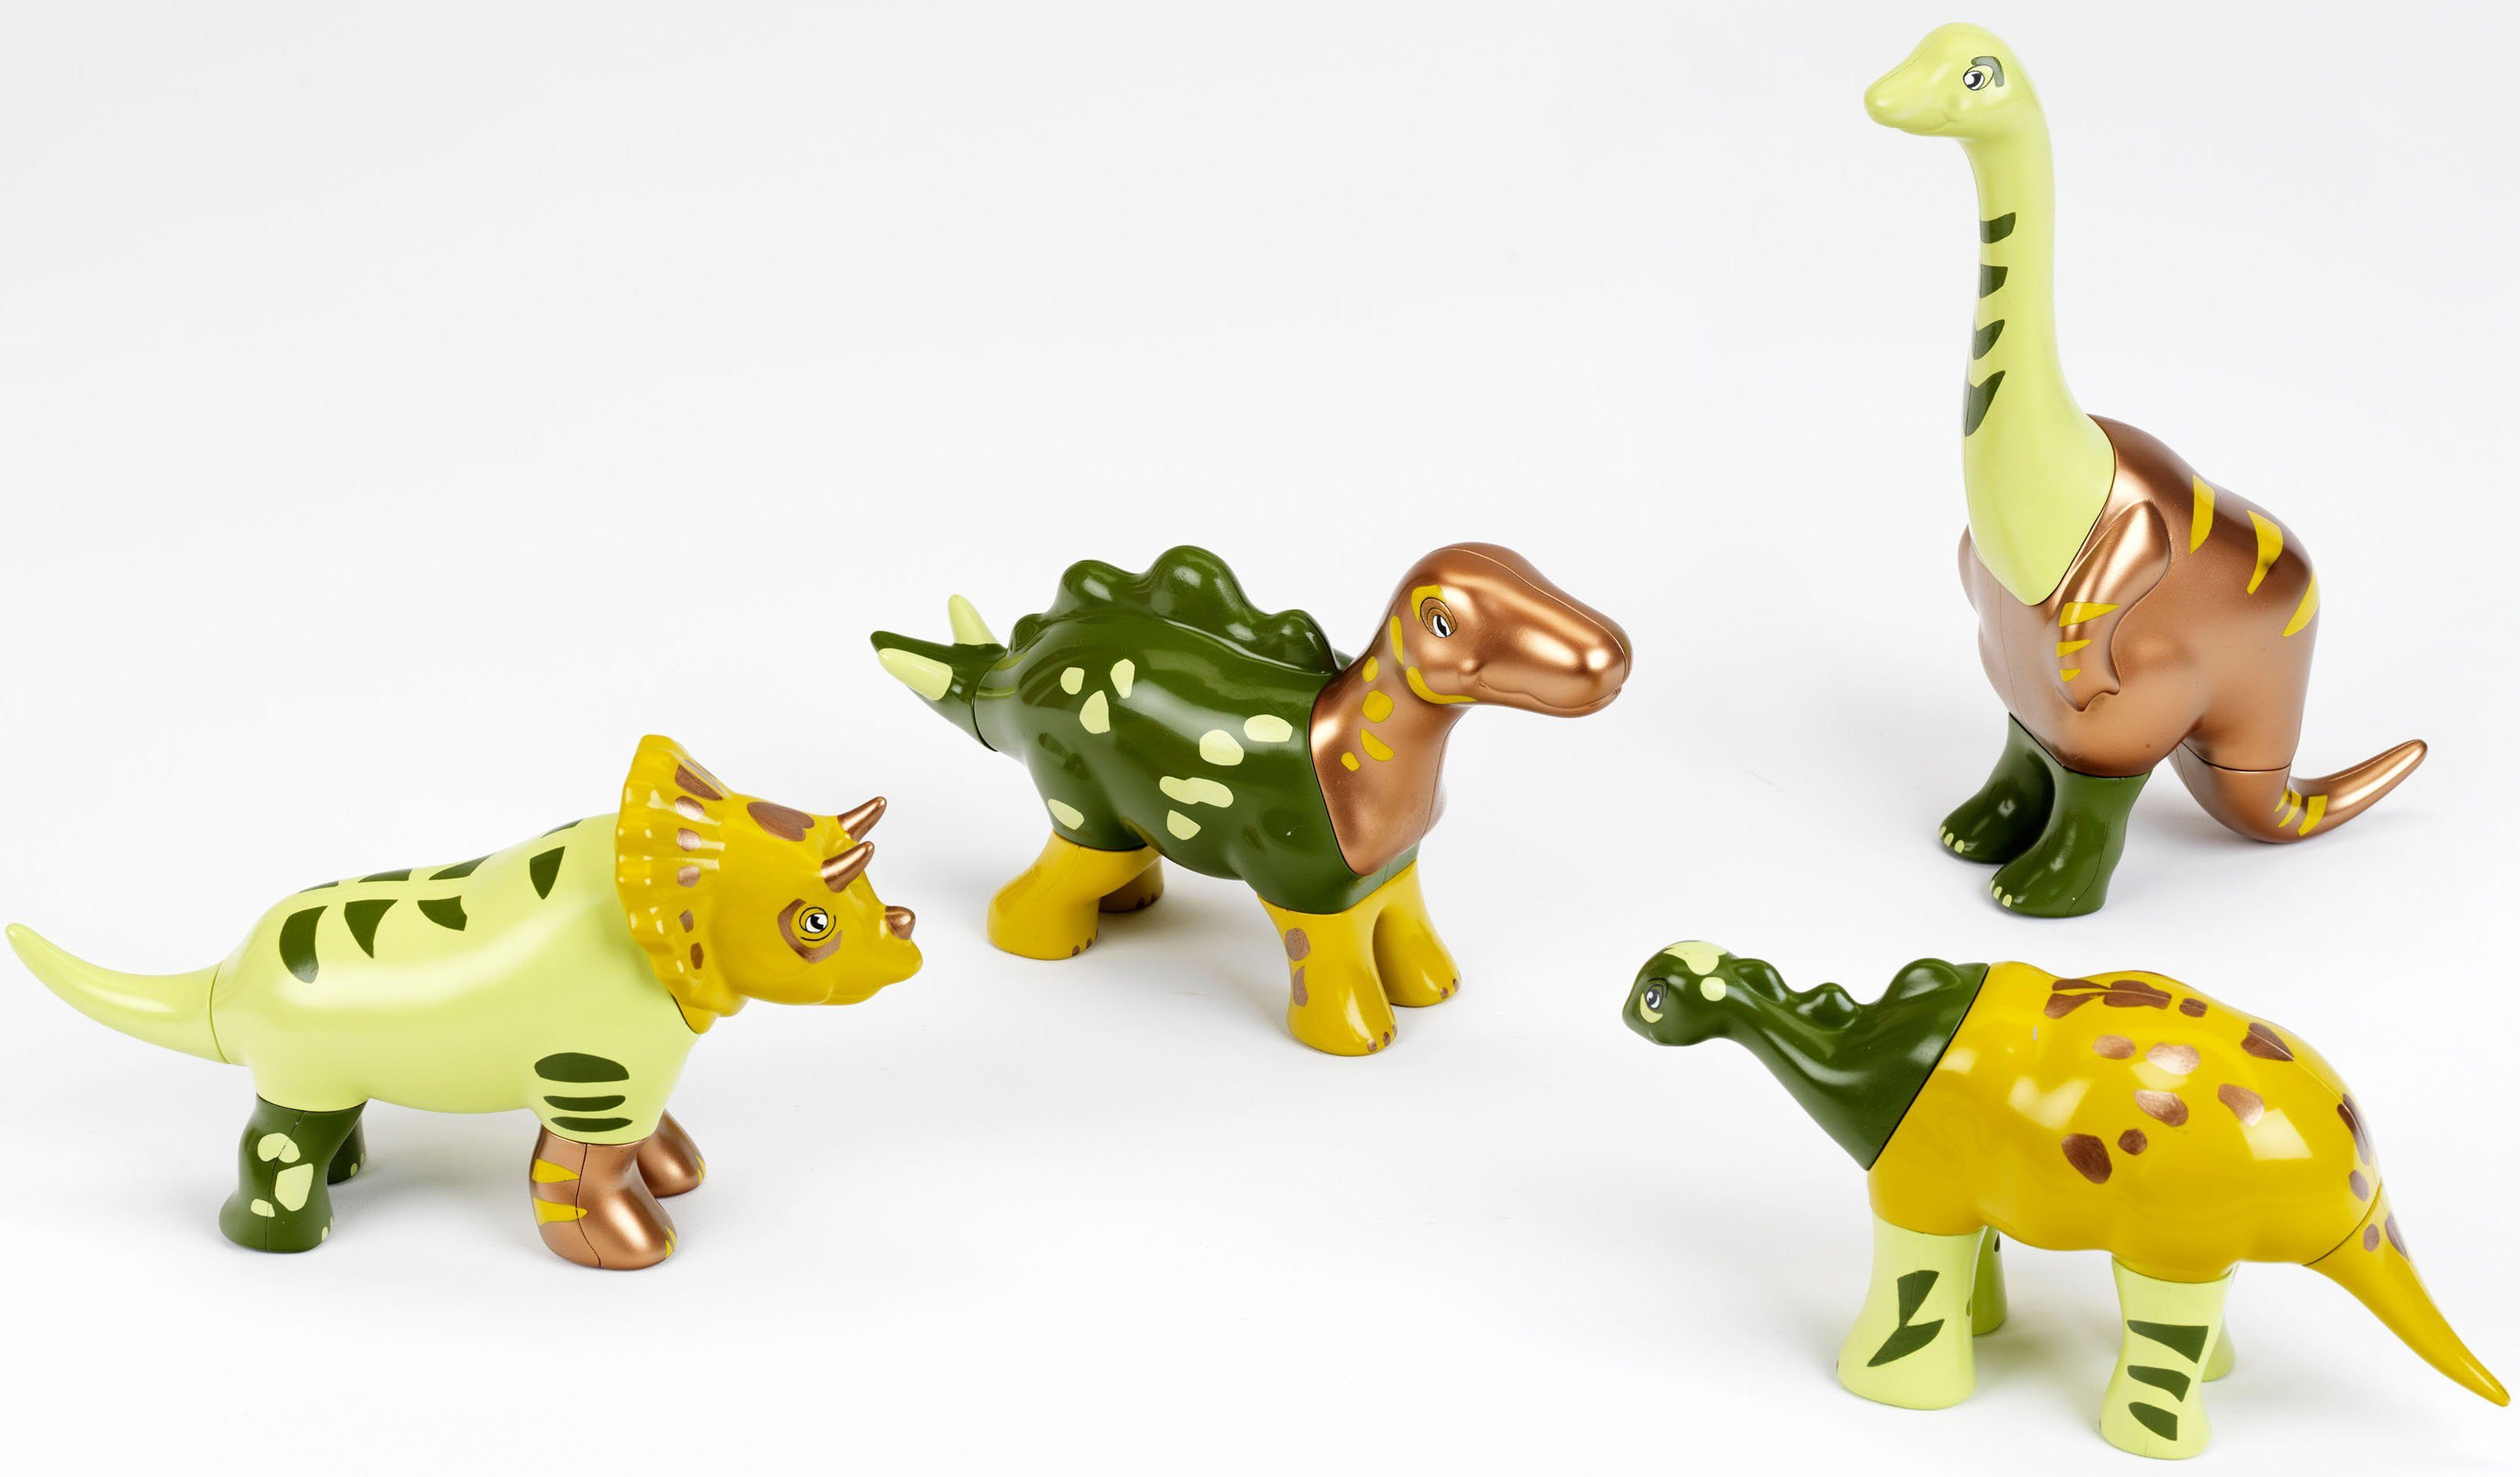 Klein Steckpuzzle Early Steps Magnetpuzzle Dinos, 4 Puzzleteile 19